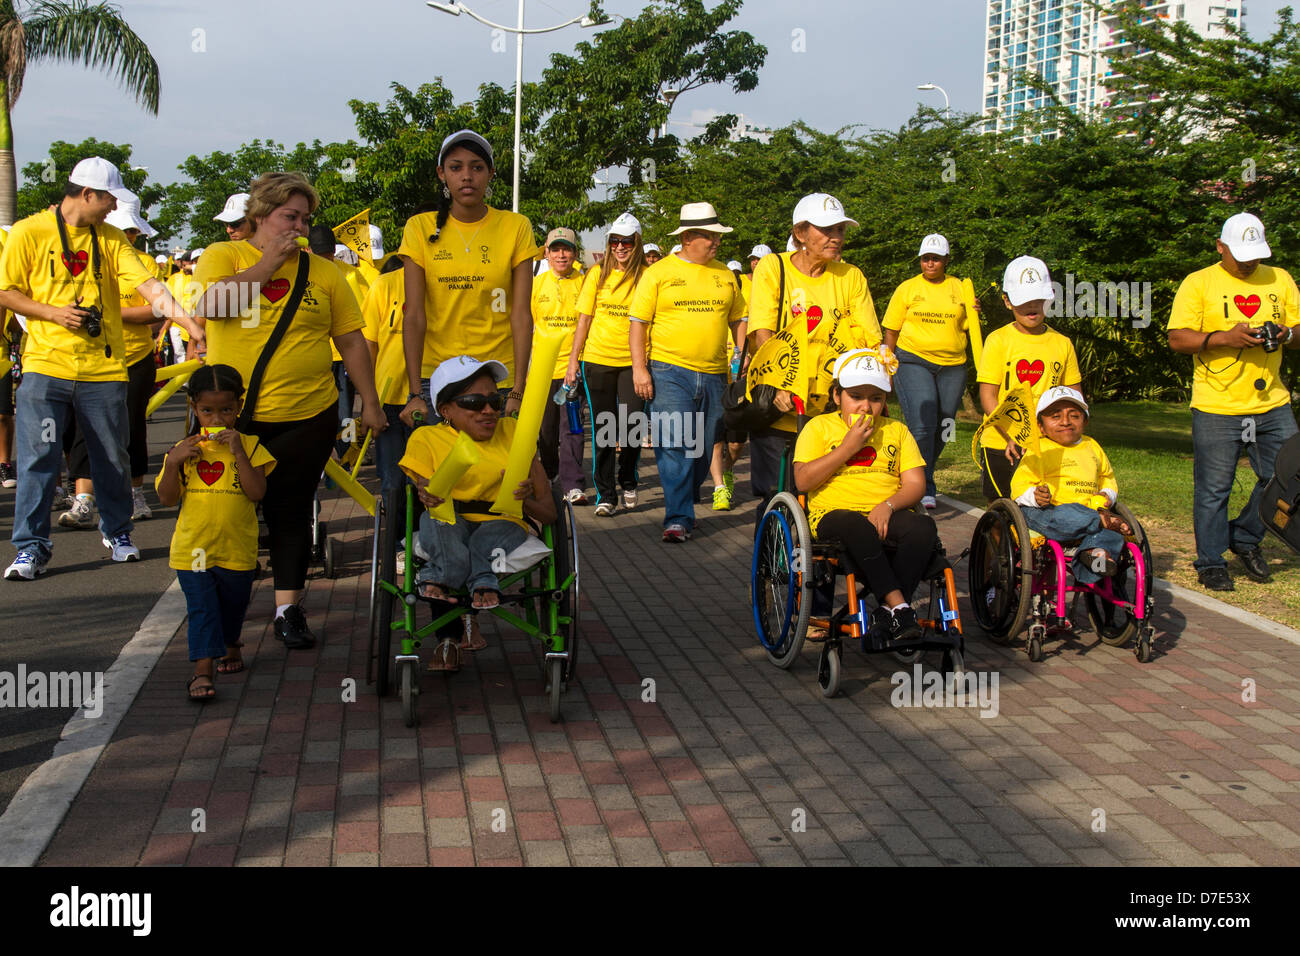 Panama City, Republic of Panama. 5th May 2013. A parade on Panama City, Republic of Panama to help getting awareness about brittle bone disease, a congenital bone disorder. The condition, or types of it, has had various other names over the years and in different nations. Among some of the most common alternatives are Ekman-Lobstein syndrome, Vrolik syndrome, and the colloquial glass-bone disease. The name osteogenesis imperfecta dates to at least 1895[18] and has been the usual medical term in the 20th century to present. Credit:  Humberto Olarte Cupas / Alamy Live News Stock Photo